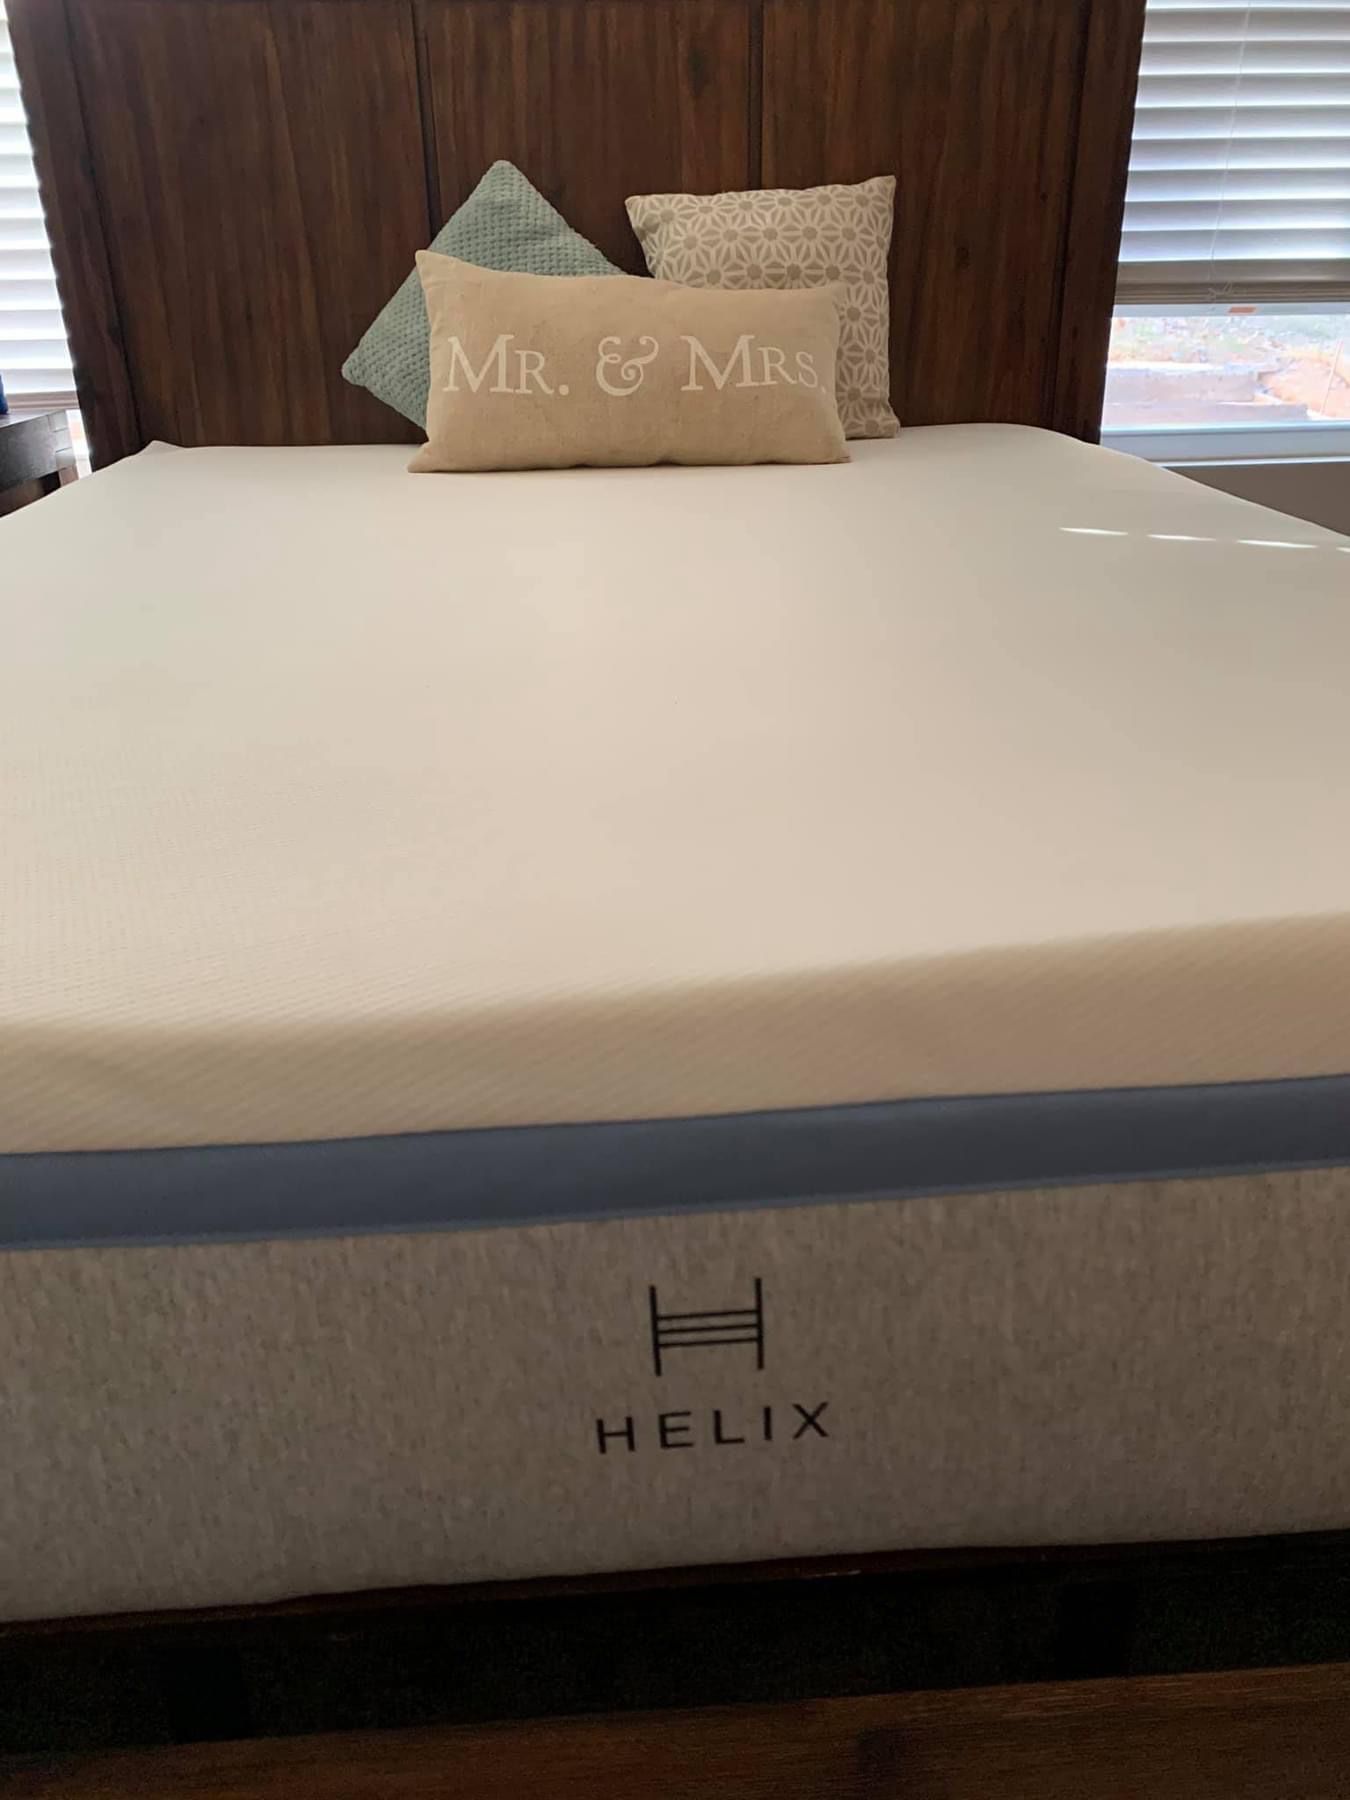 Helix Moonlight, Queen, Cover: Original Cover Like New, Perfect Condition $400